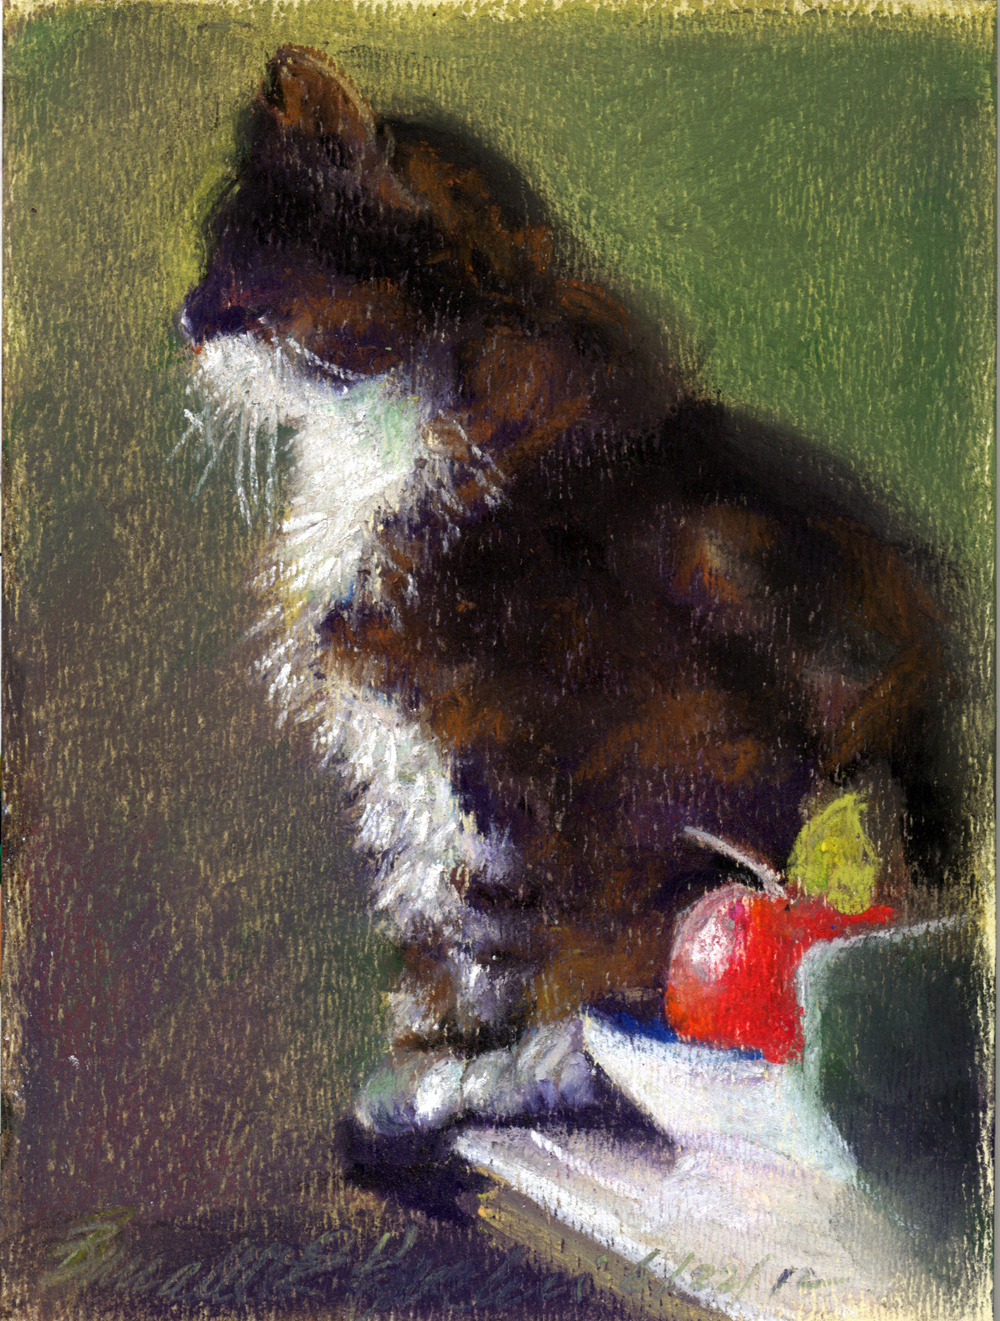 pastel sketch of cat on table with apple